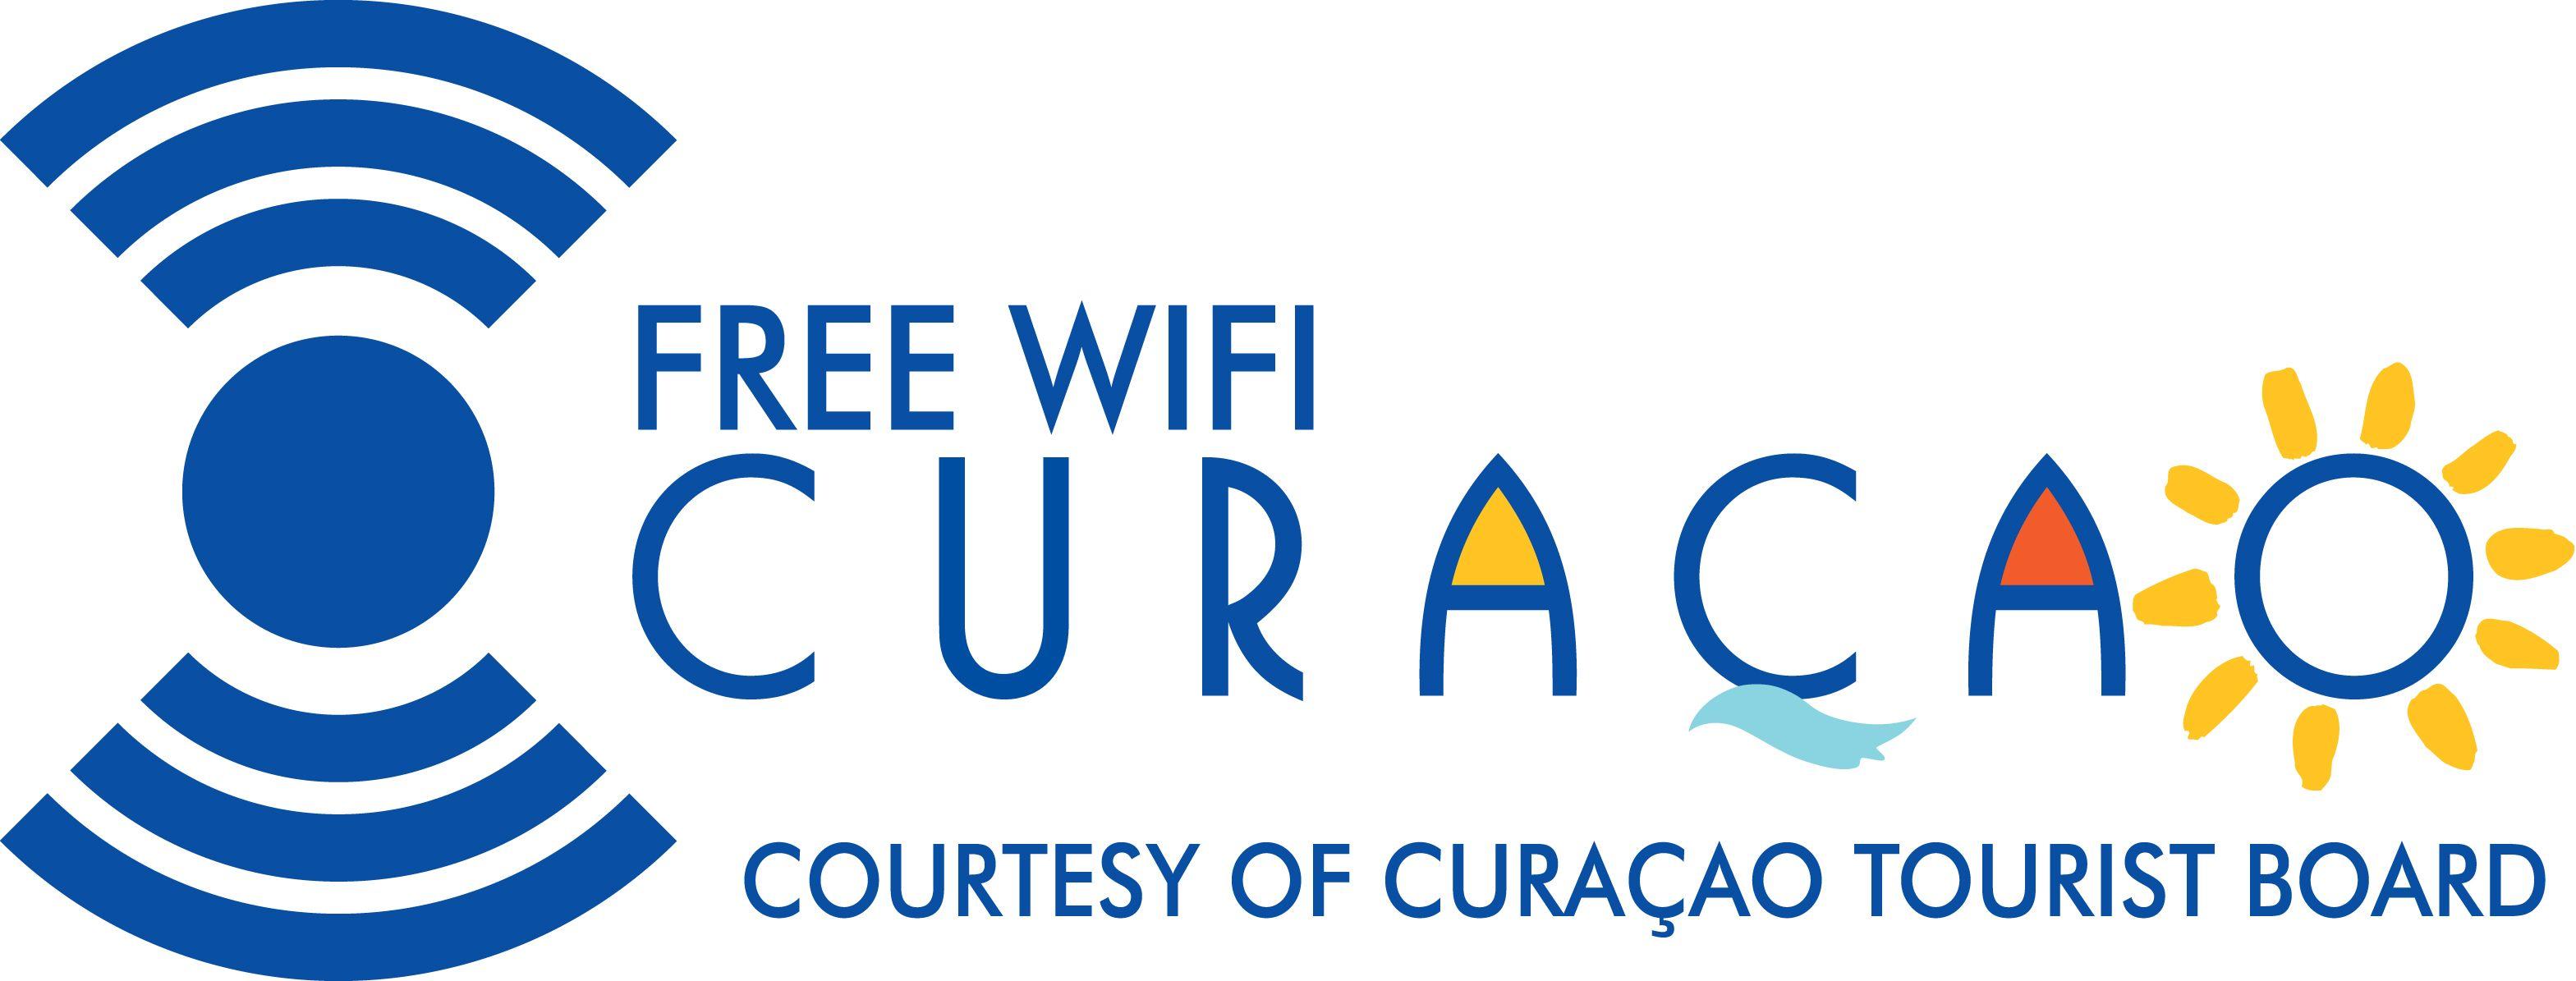 Curacao Logo - Free internet in downtown Willemstadçao Chronicle